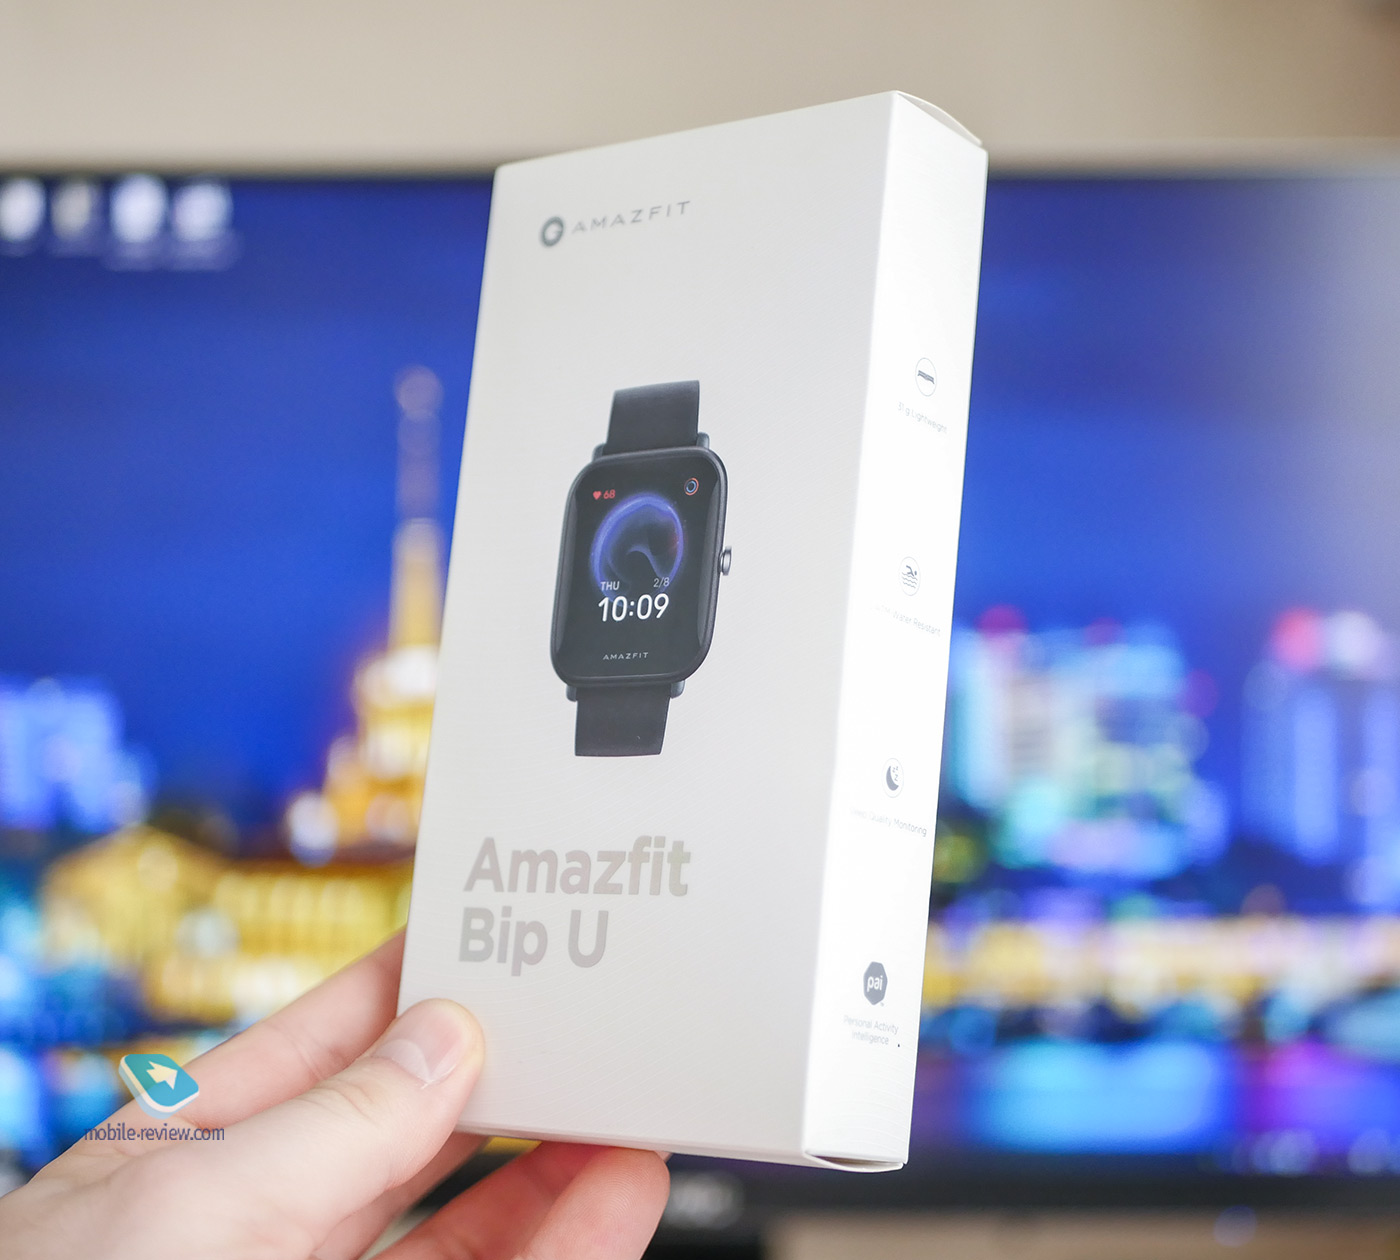 Amazfit Bip U review - legacy of the legendary Bip, only with IPS screen